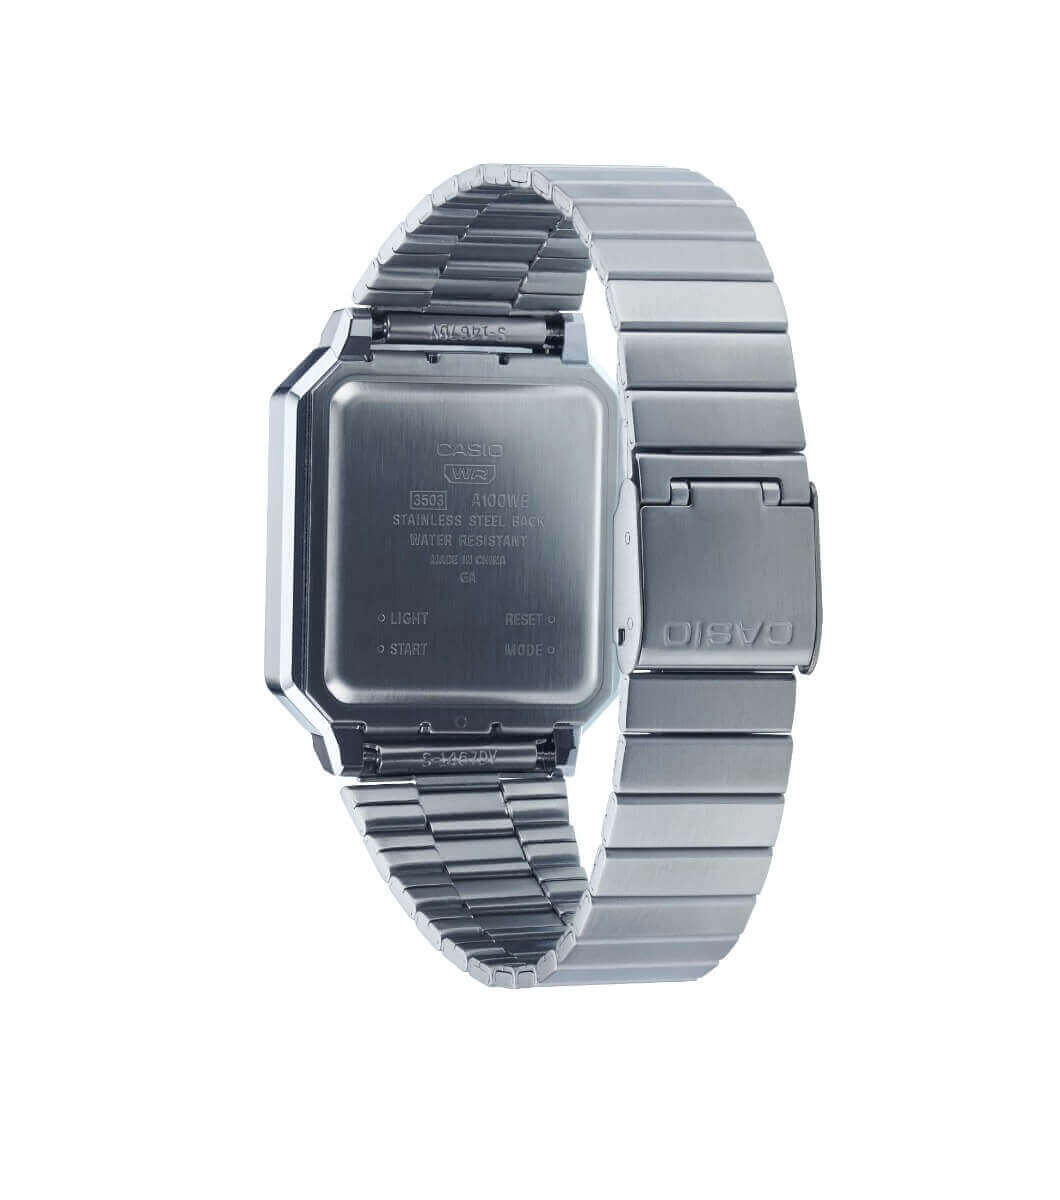 Load image into Gallery viewer, Casio Vintage Silver Stainless Steel Digital Watch A100WE-7BEF
